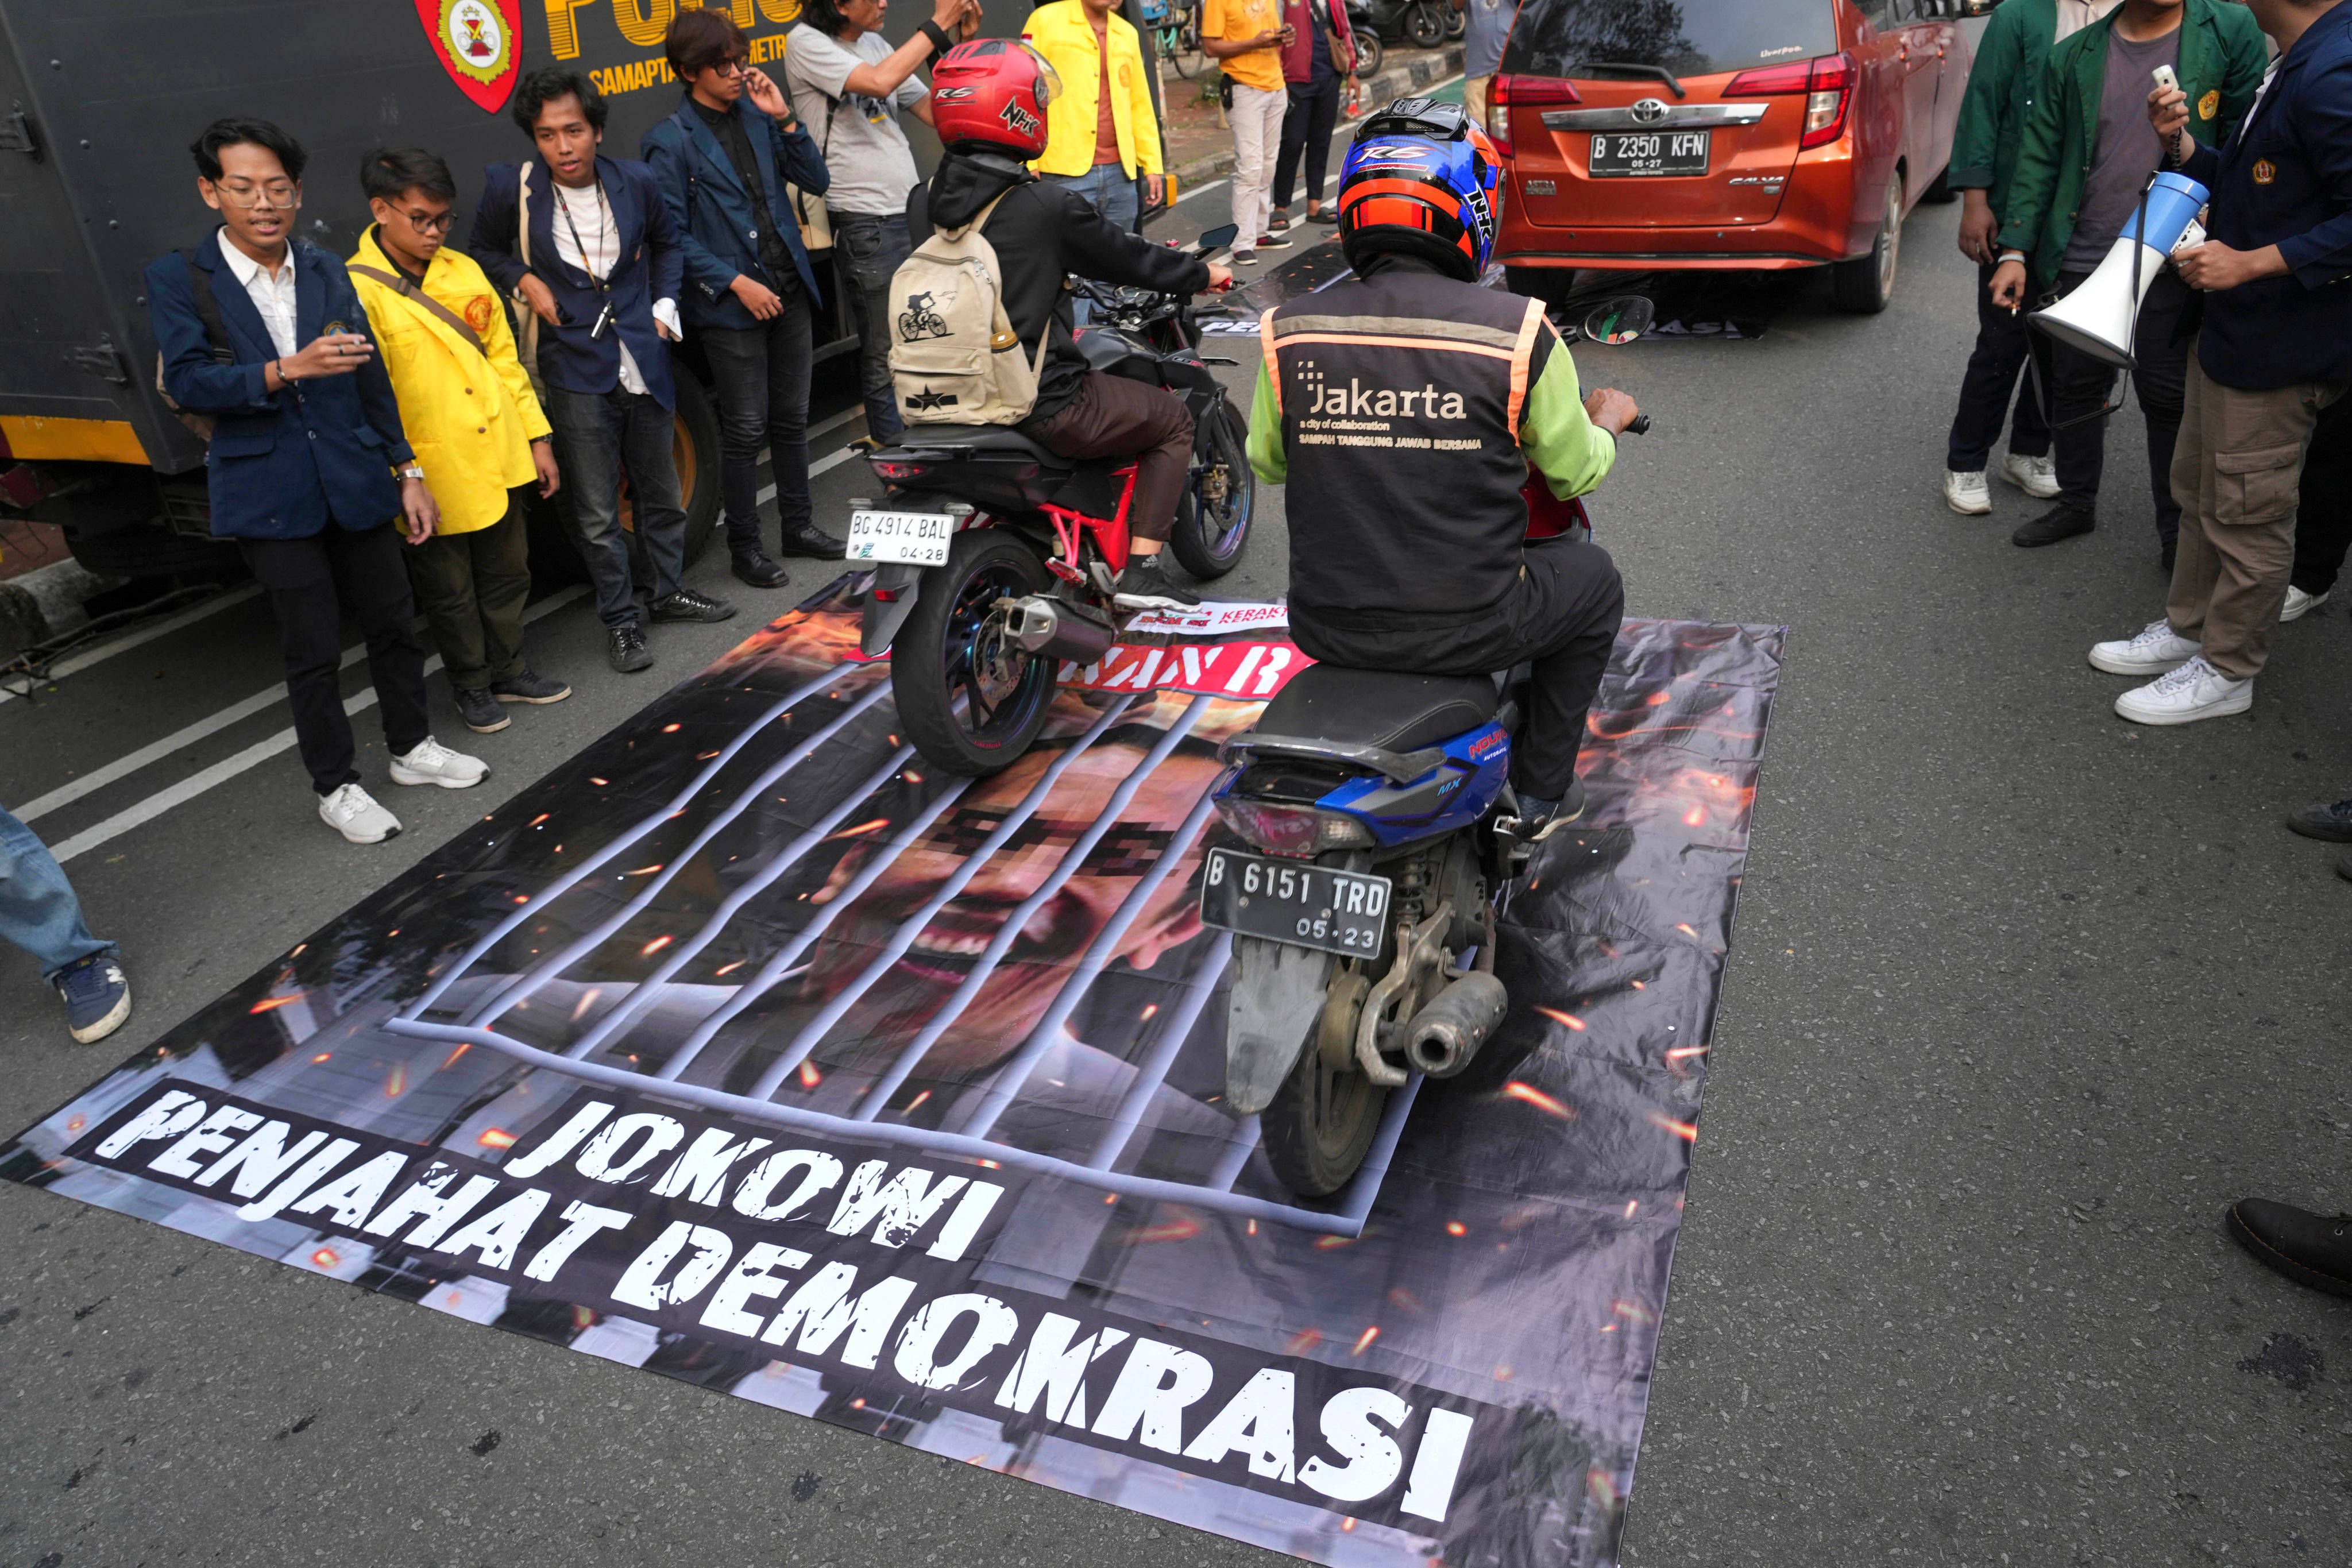 A banner with an image depicting Indonesian President Joko Widodo behind bars is laid out on the road during a rally demanding a fair presidential election. Students claim the president has been acting neutral in the election. Photo: AP